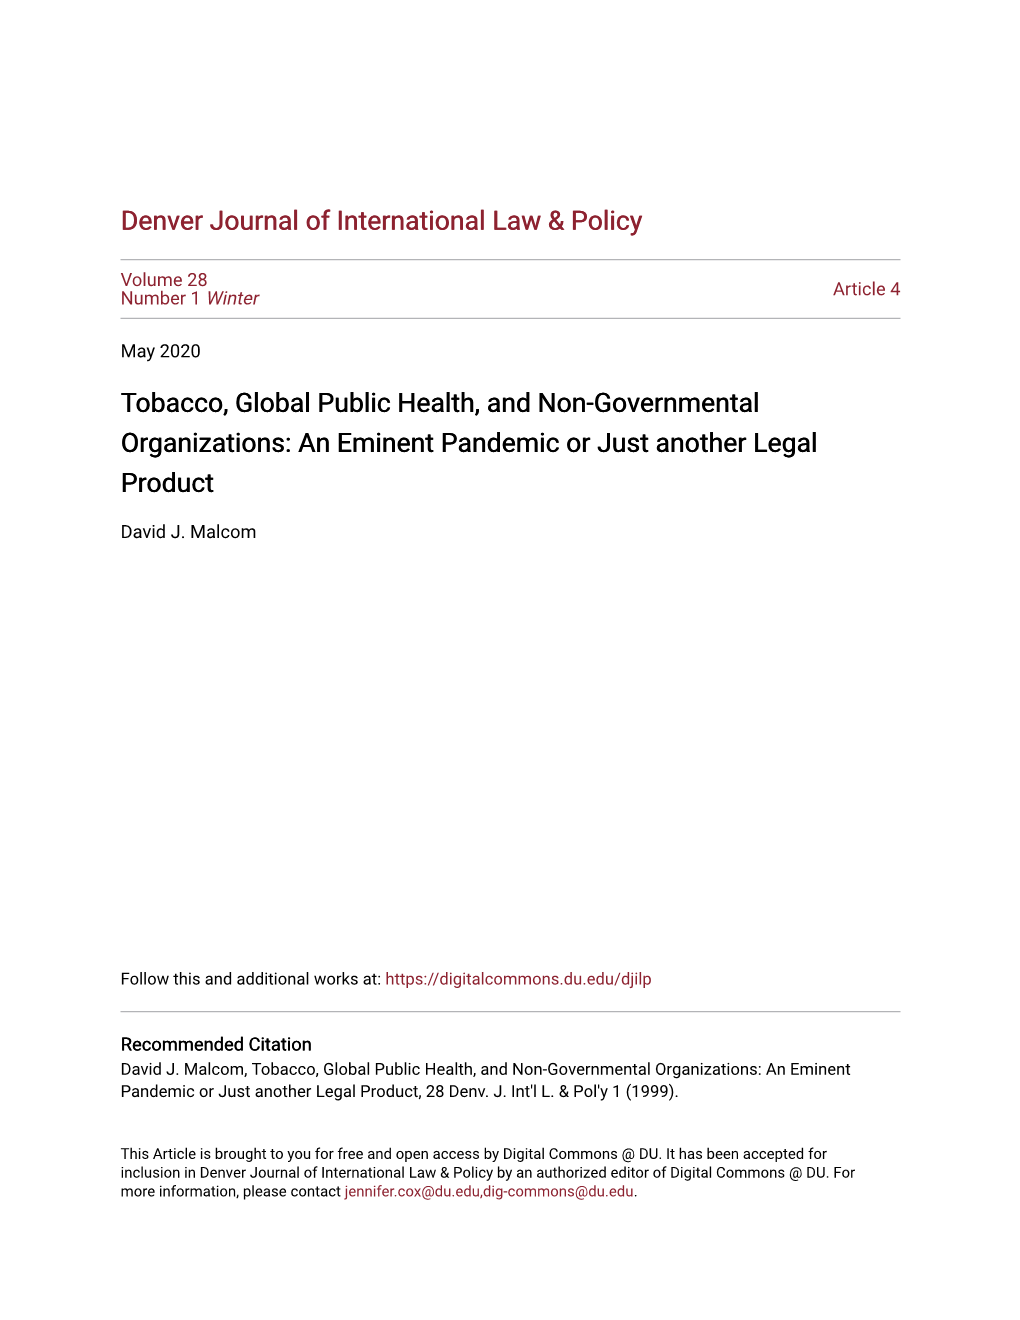 Tobacco, Global Public Health, and Non-Governmental Organizations: an Eminent Pandemic Or Just Another Legal Product